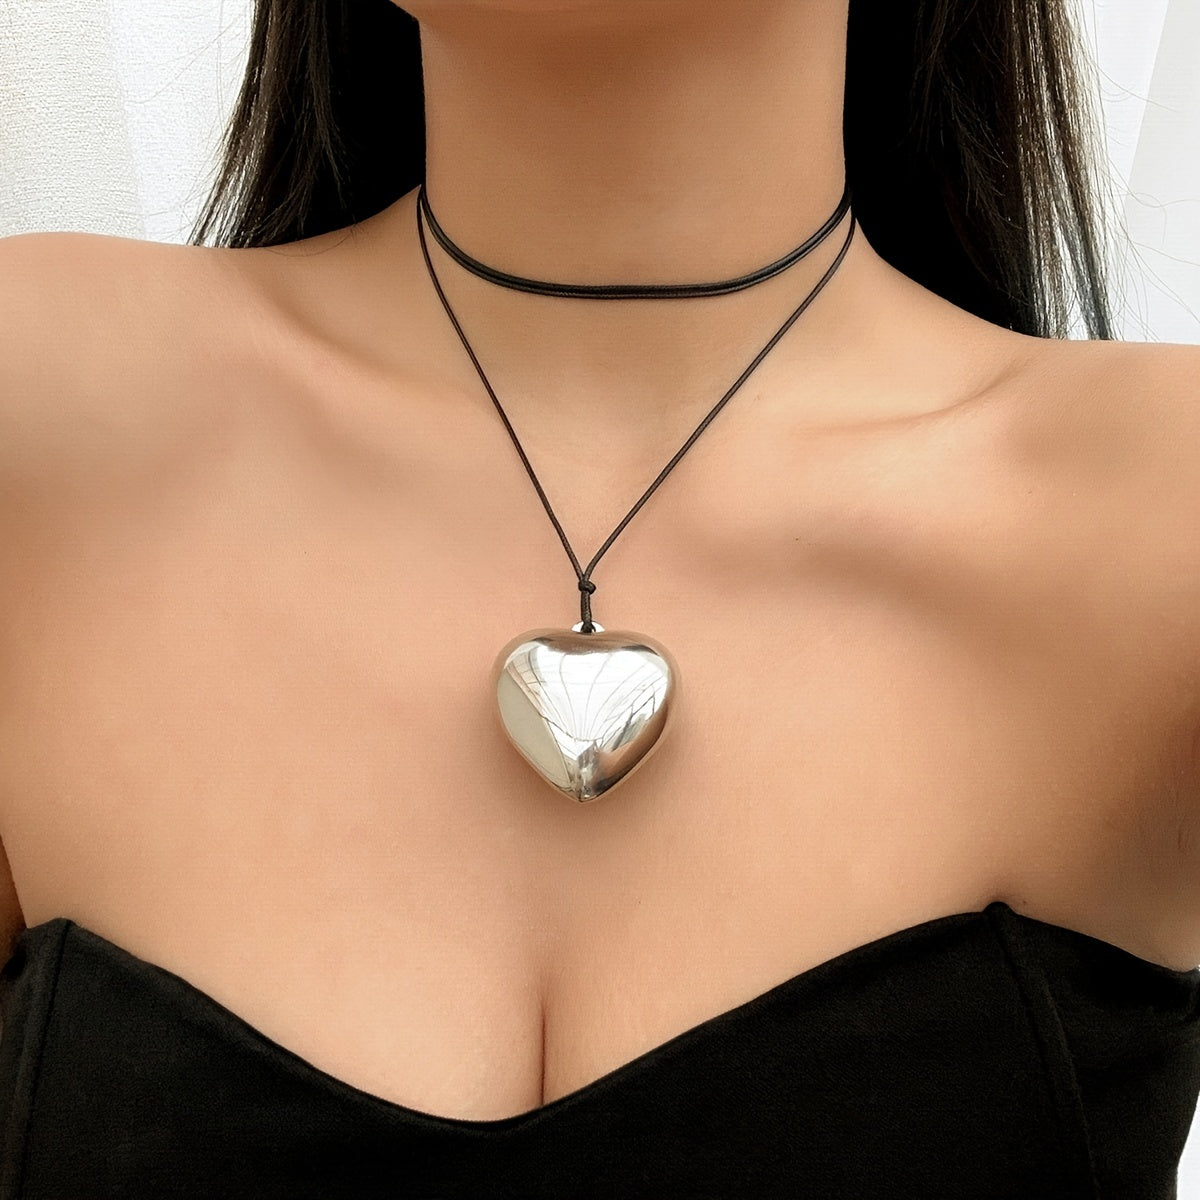 Gorgeous Heart-Shaped Pendant Necklace - Perfect for Women and Girls Every Day!